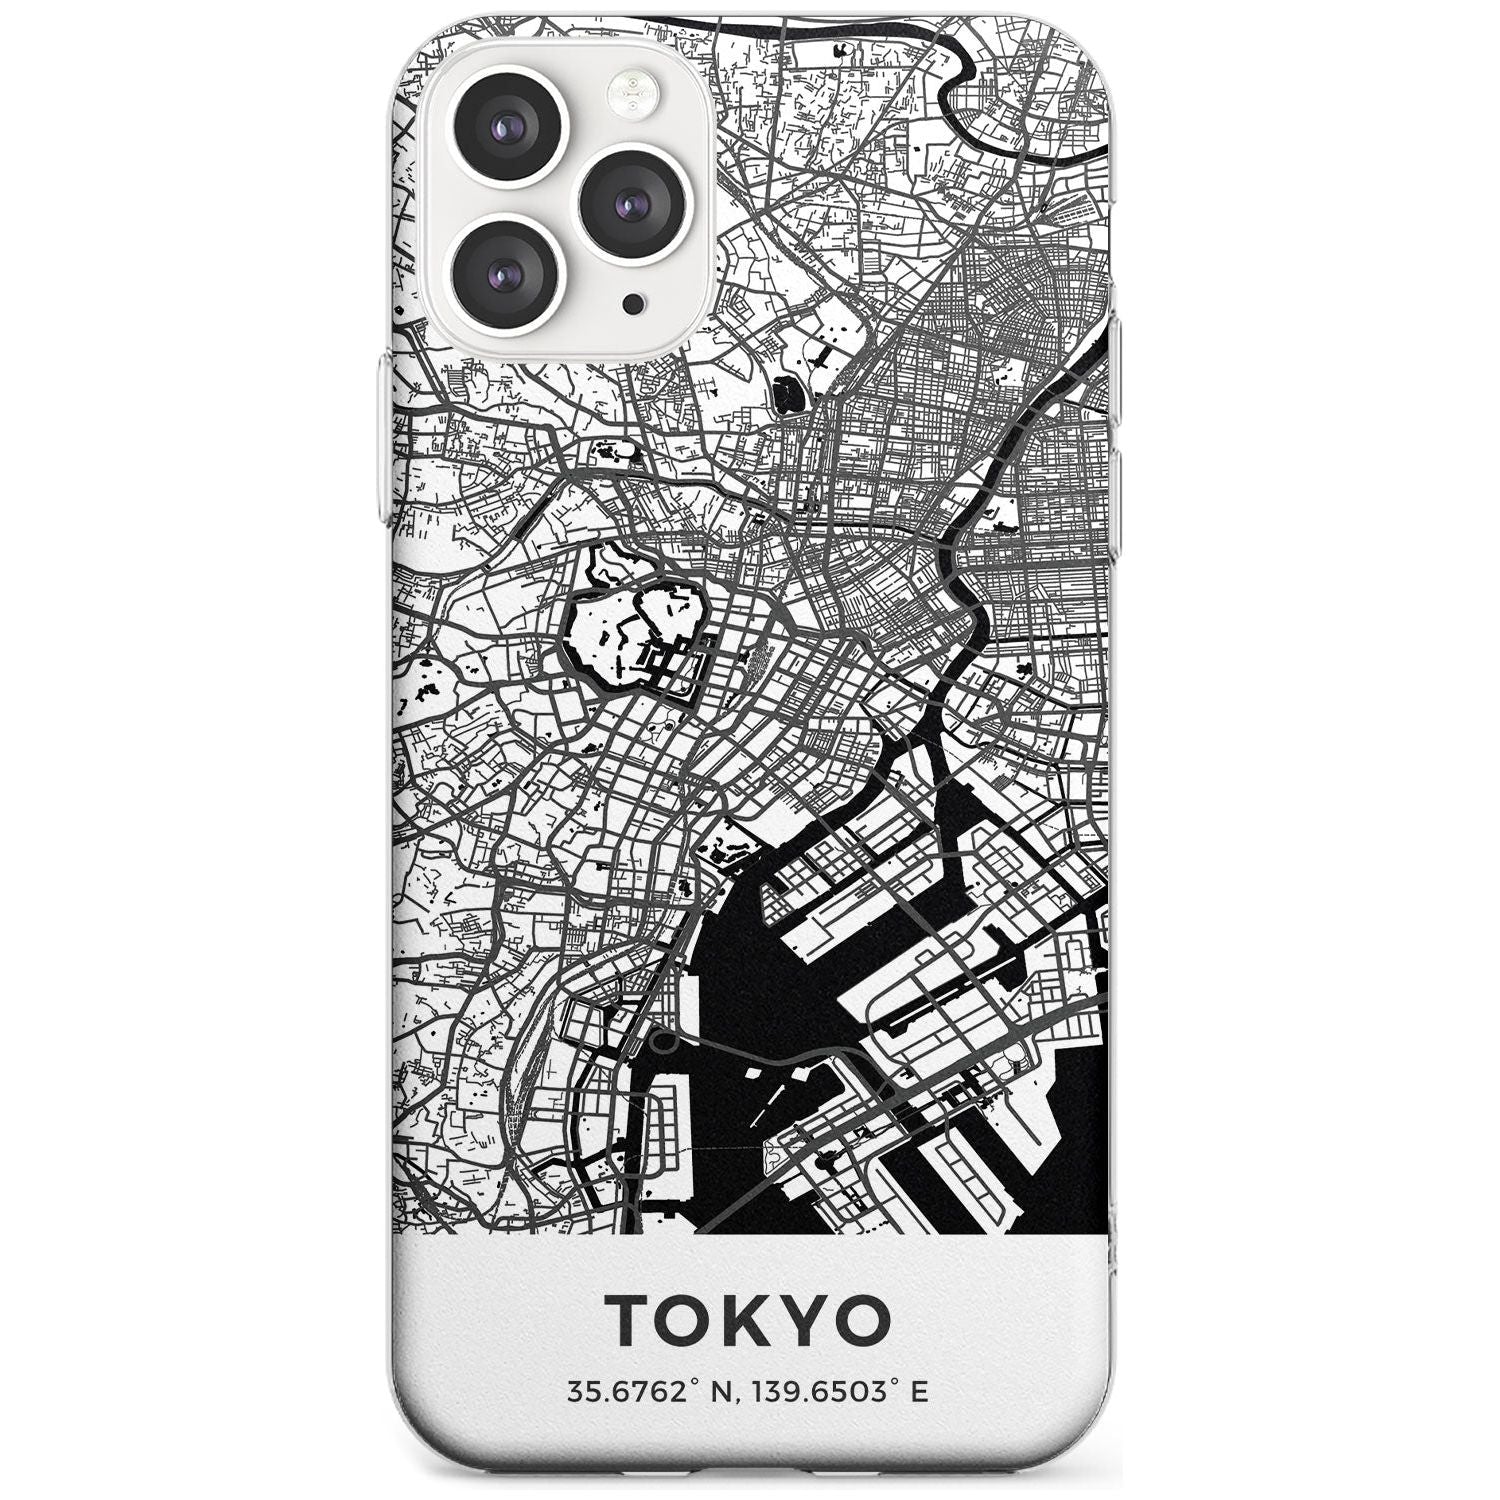 Map of Tokyo, Japan Slim TPU Phone Case for iPhone 11 Pro Max